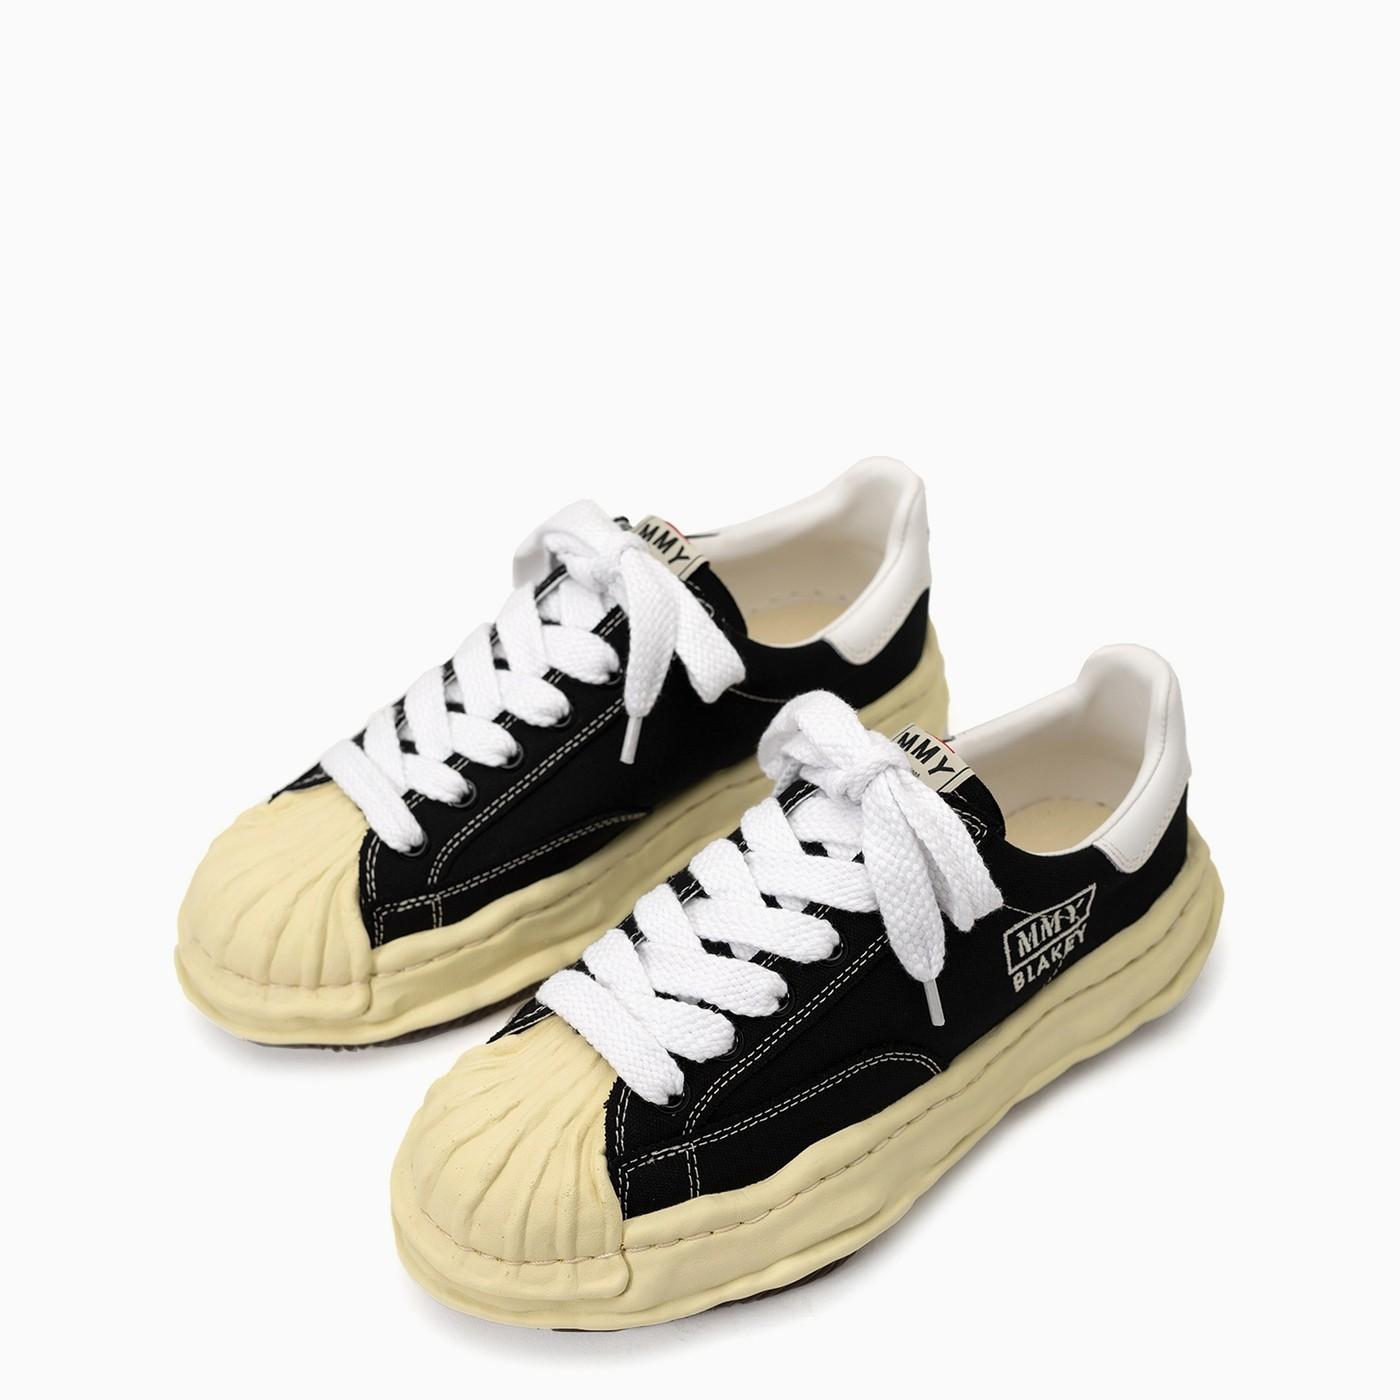 Maison Mihara Yasuhiro Canvas Blakey Low-top Sneakers in Black for